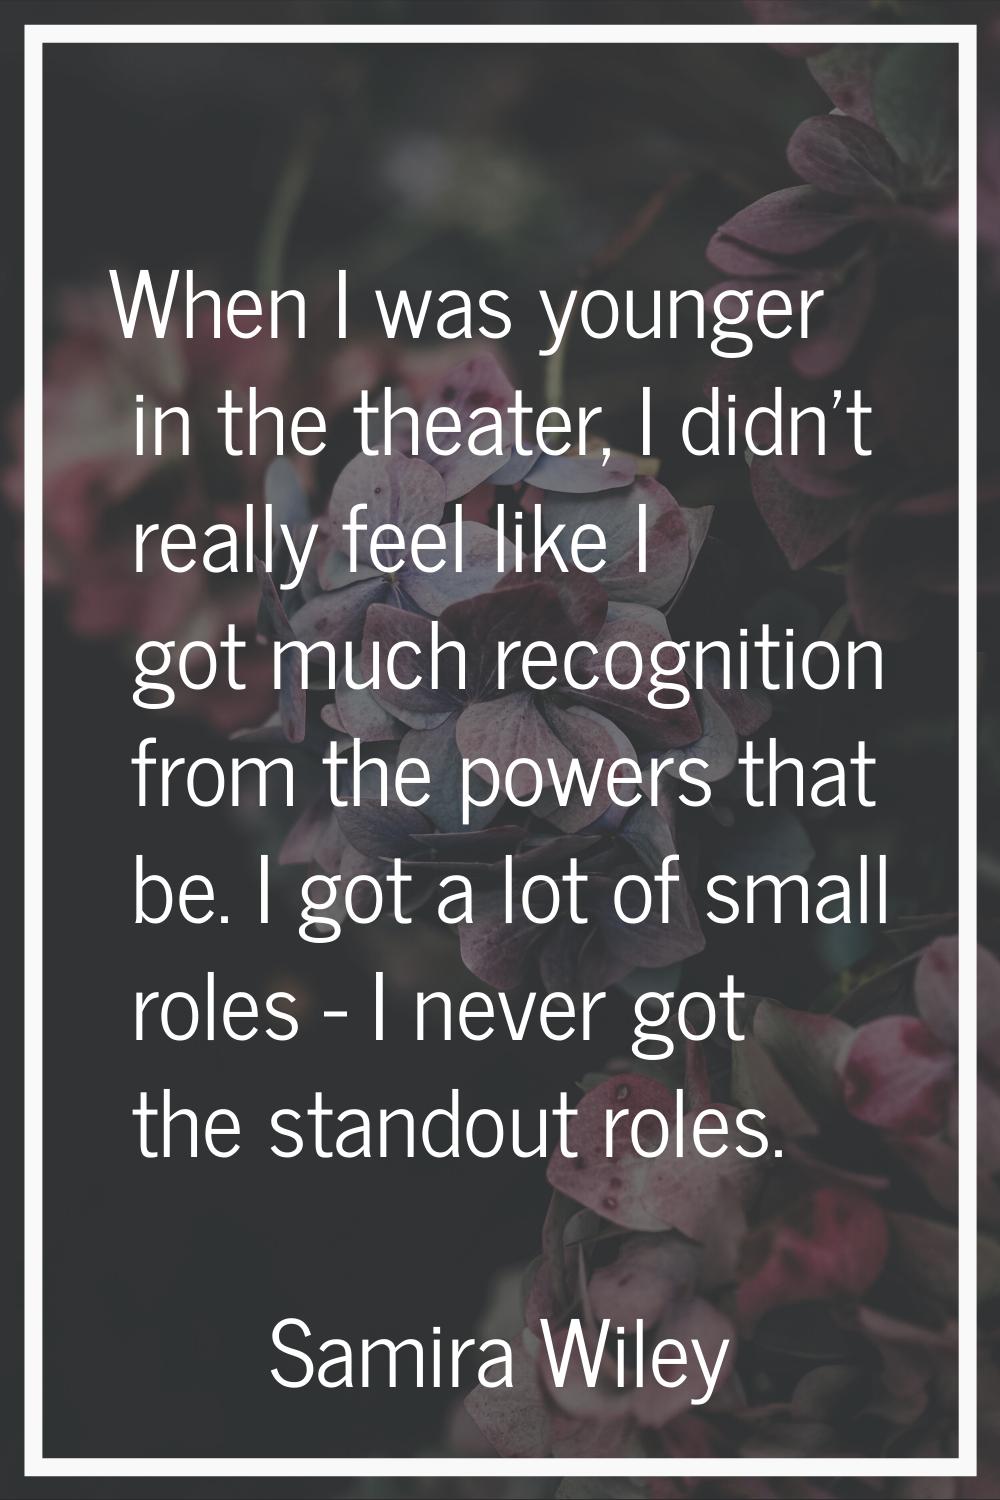 When I was younger in the theater, I didn't really feel like I got much recognition from the powers